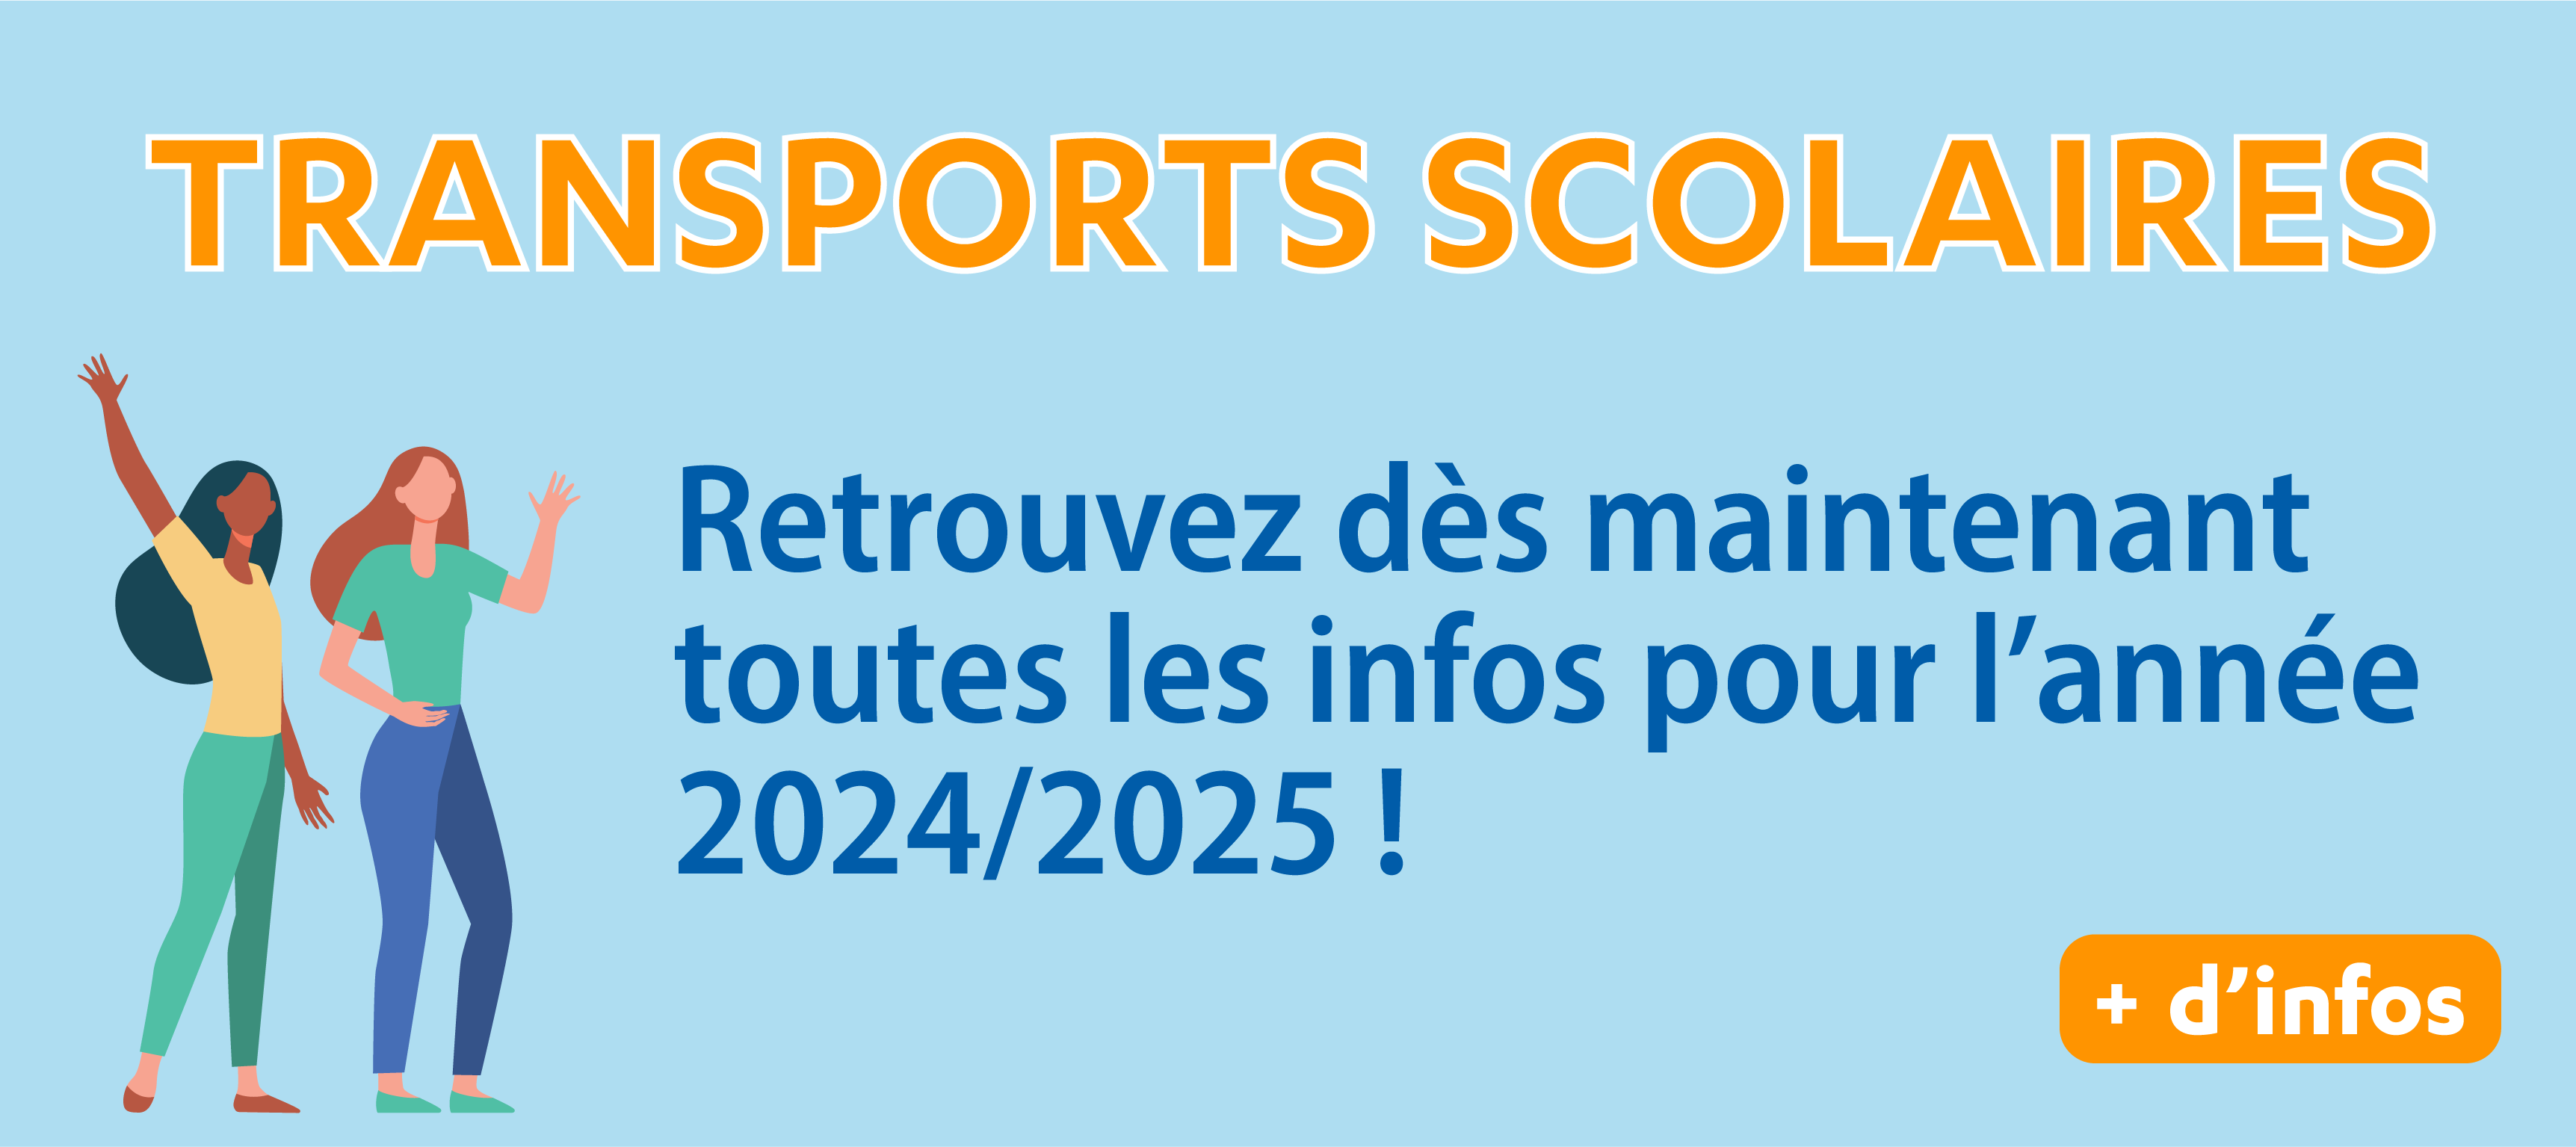 Transports scolaires 2023/2024